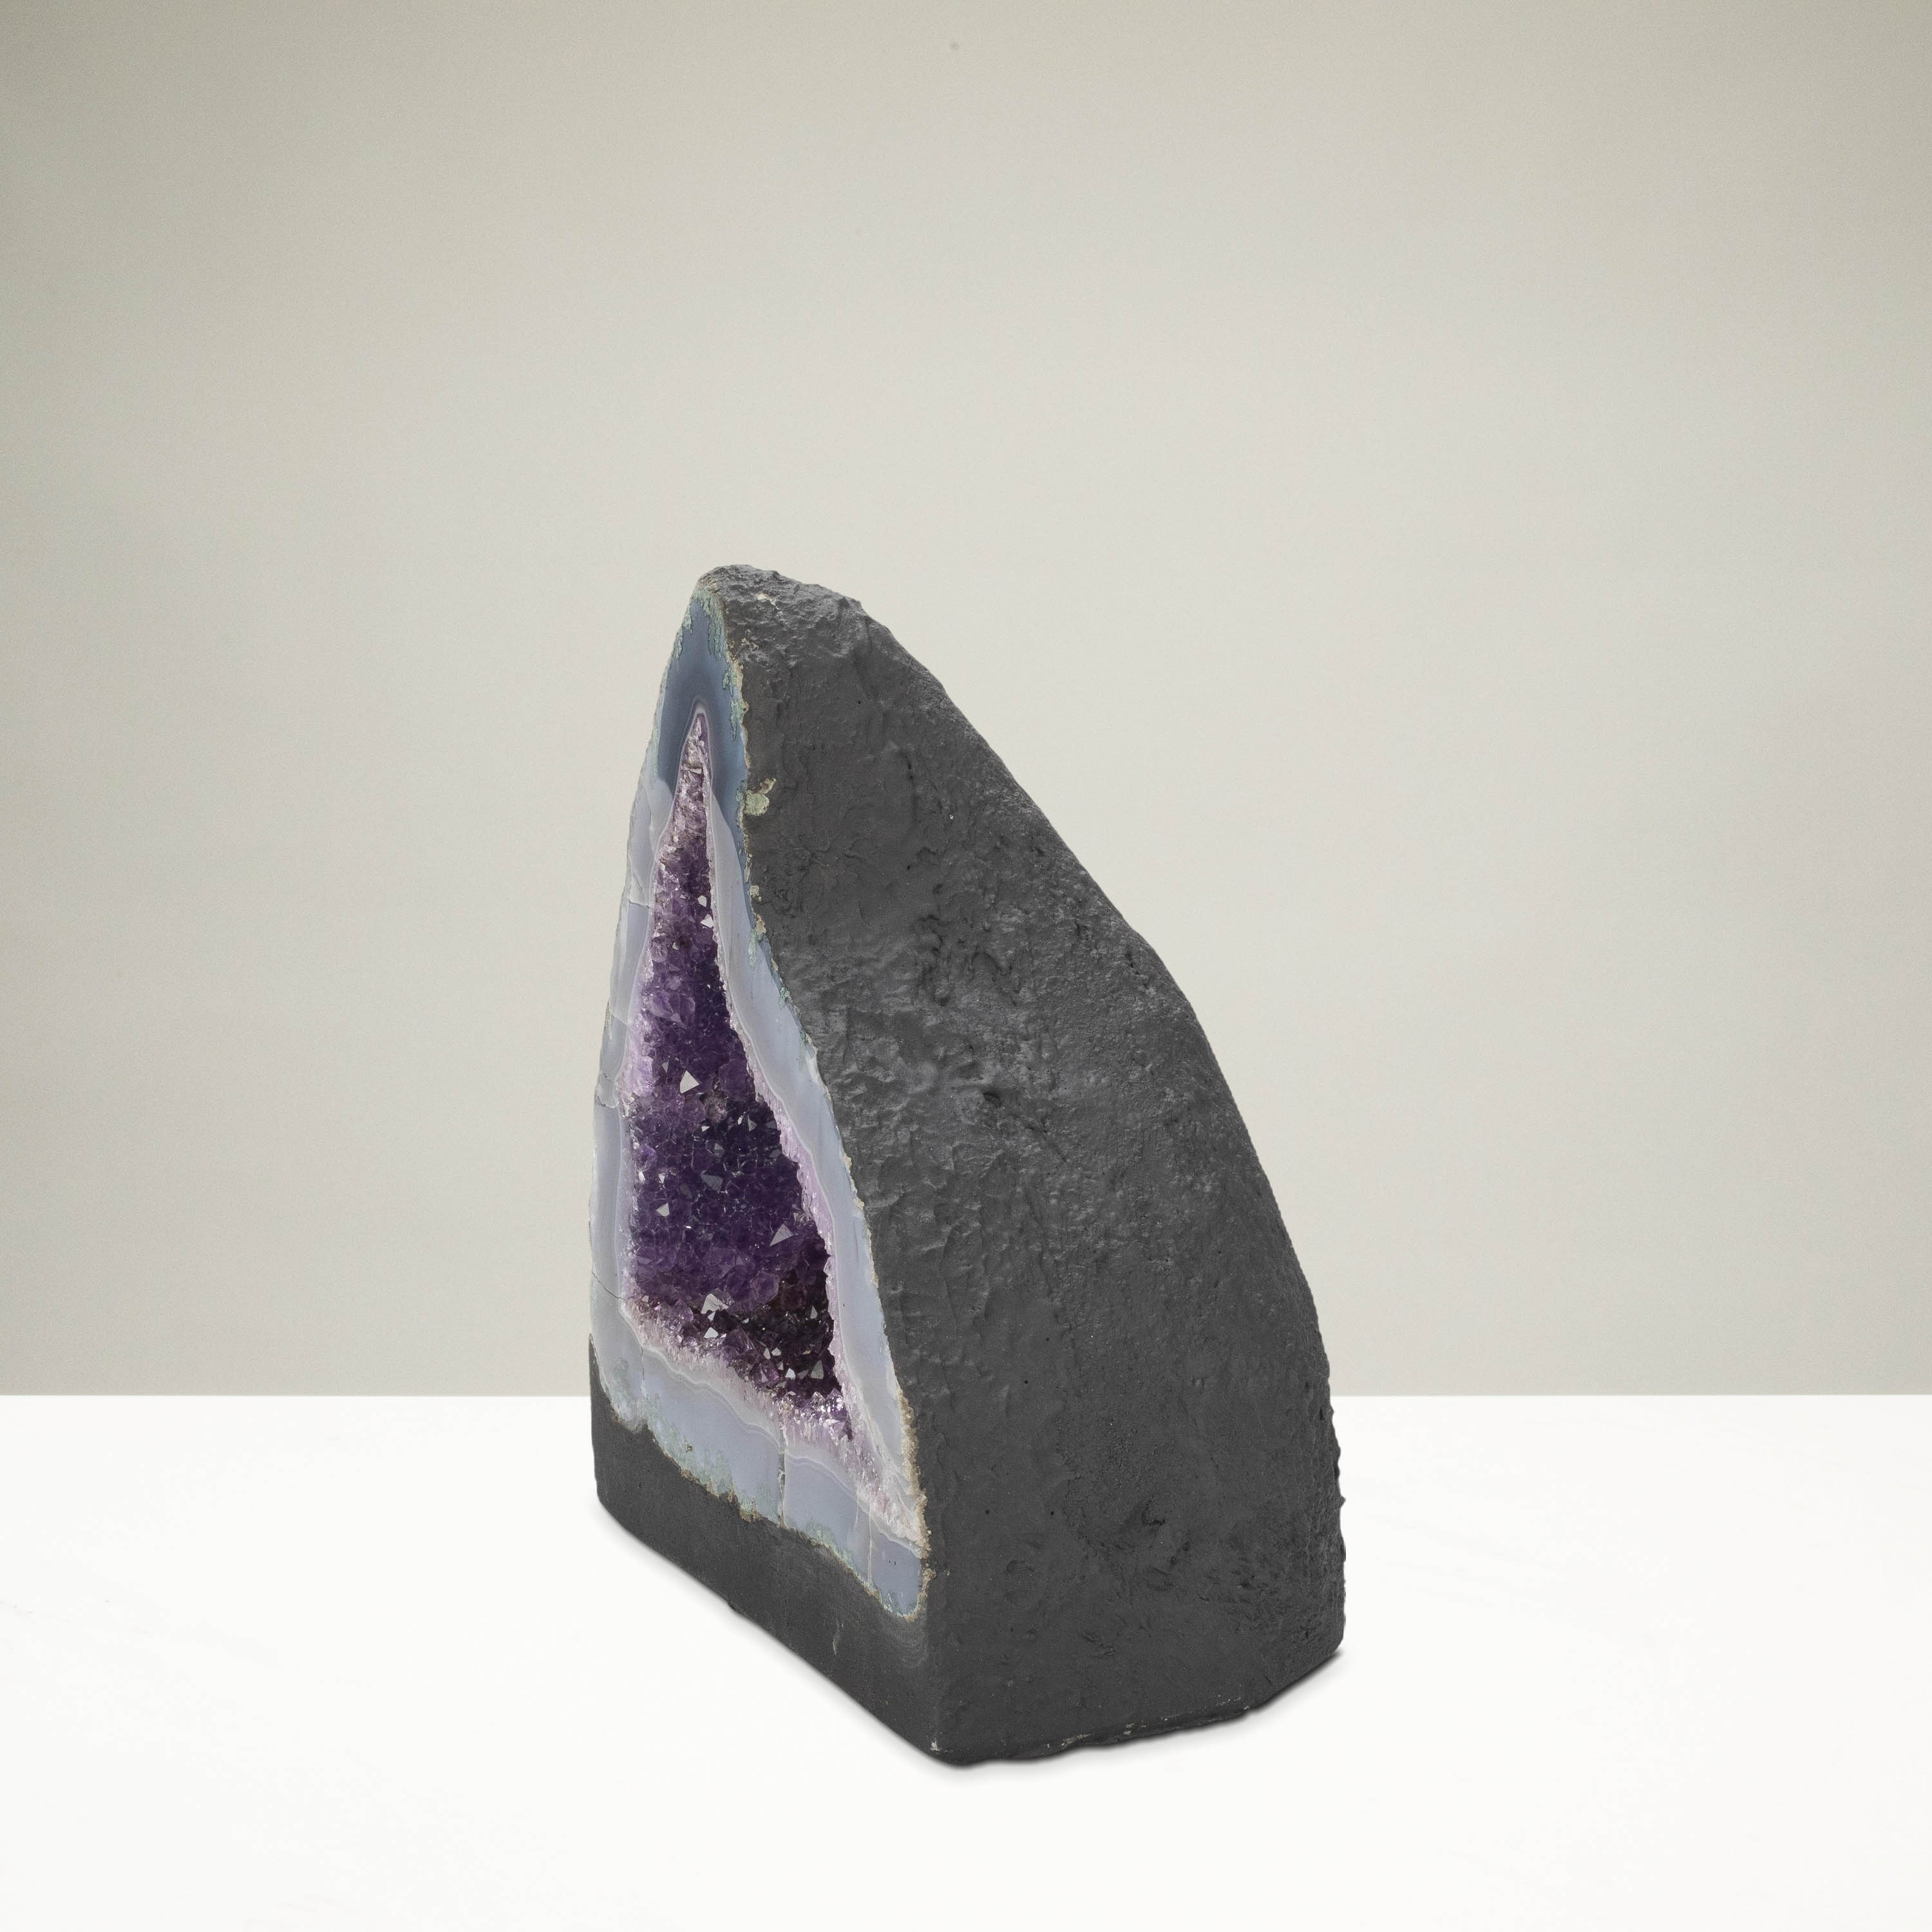 Kalifano Amethyst Amethyst Geode Cathedral - 11.5" / 23 lbs BAG3600.019